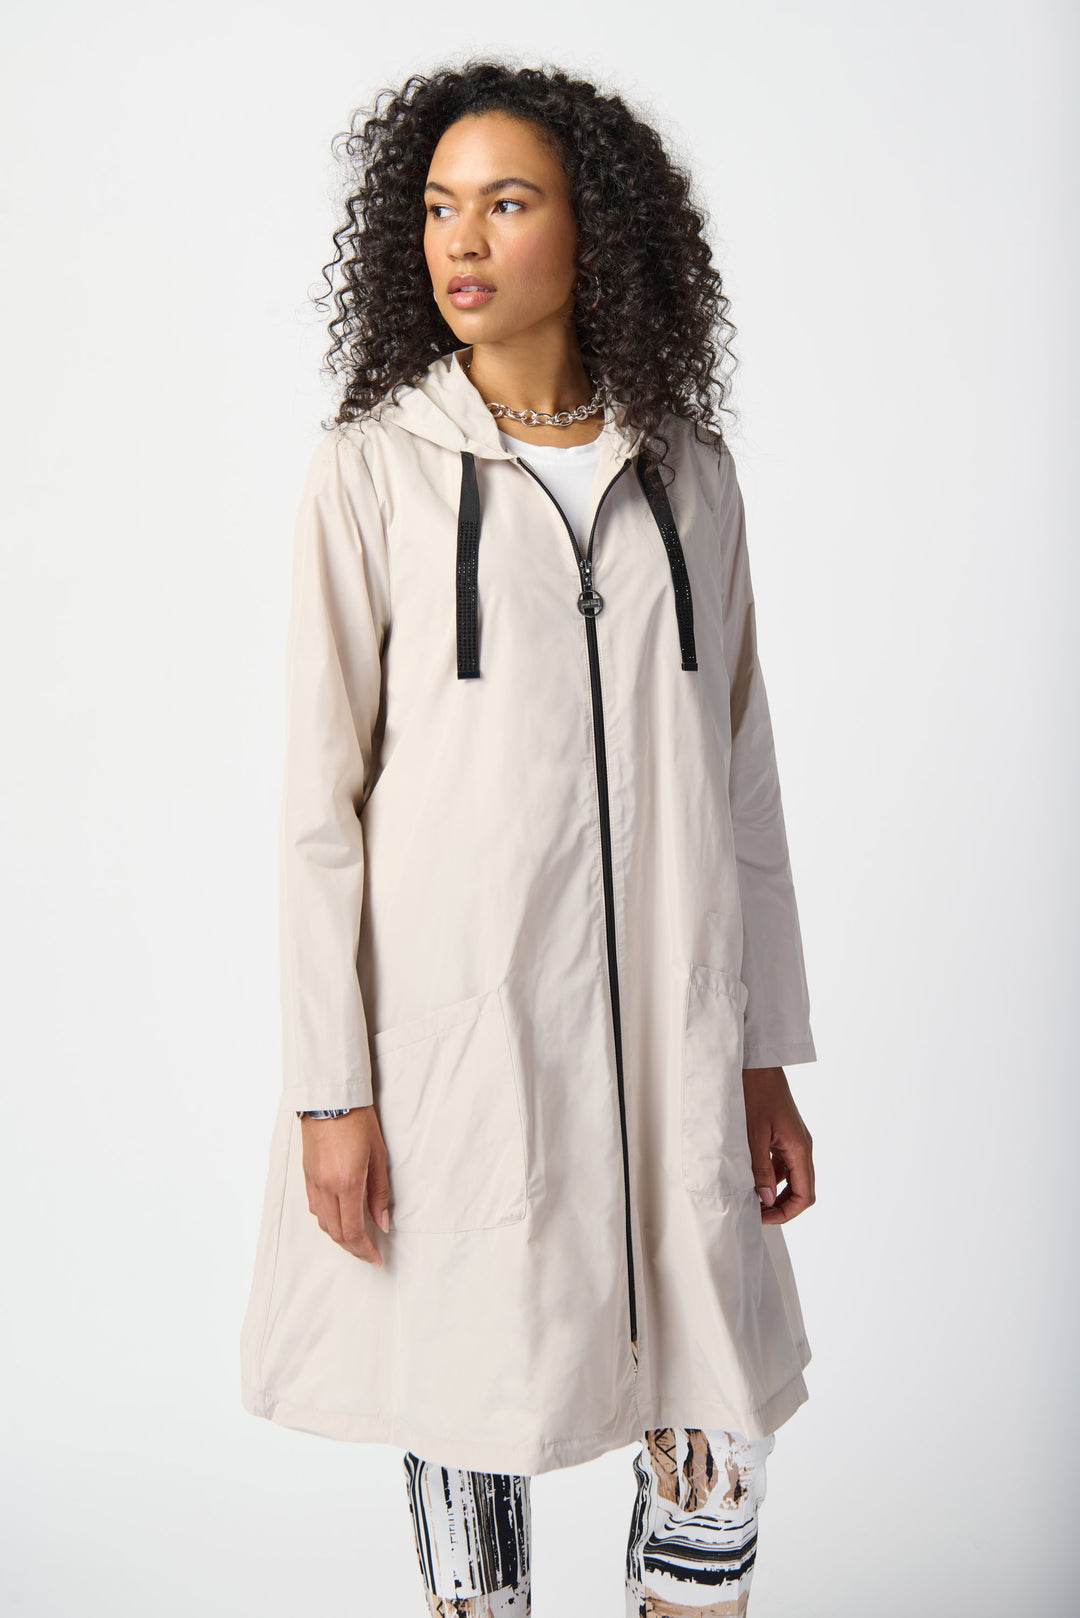 Joseph Ribkoff Summer 2024 a classic, modern and sleek design that combines fashion and function. This long coat features a drawstring hood and full front zipper for added warmth and style.